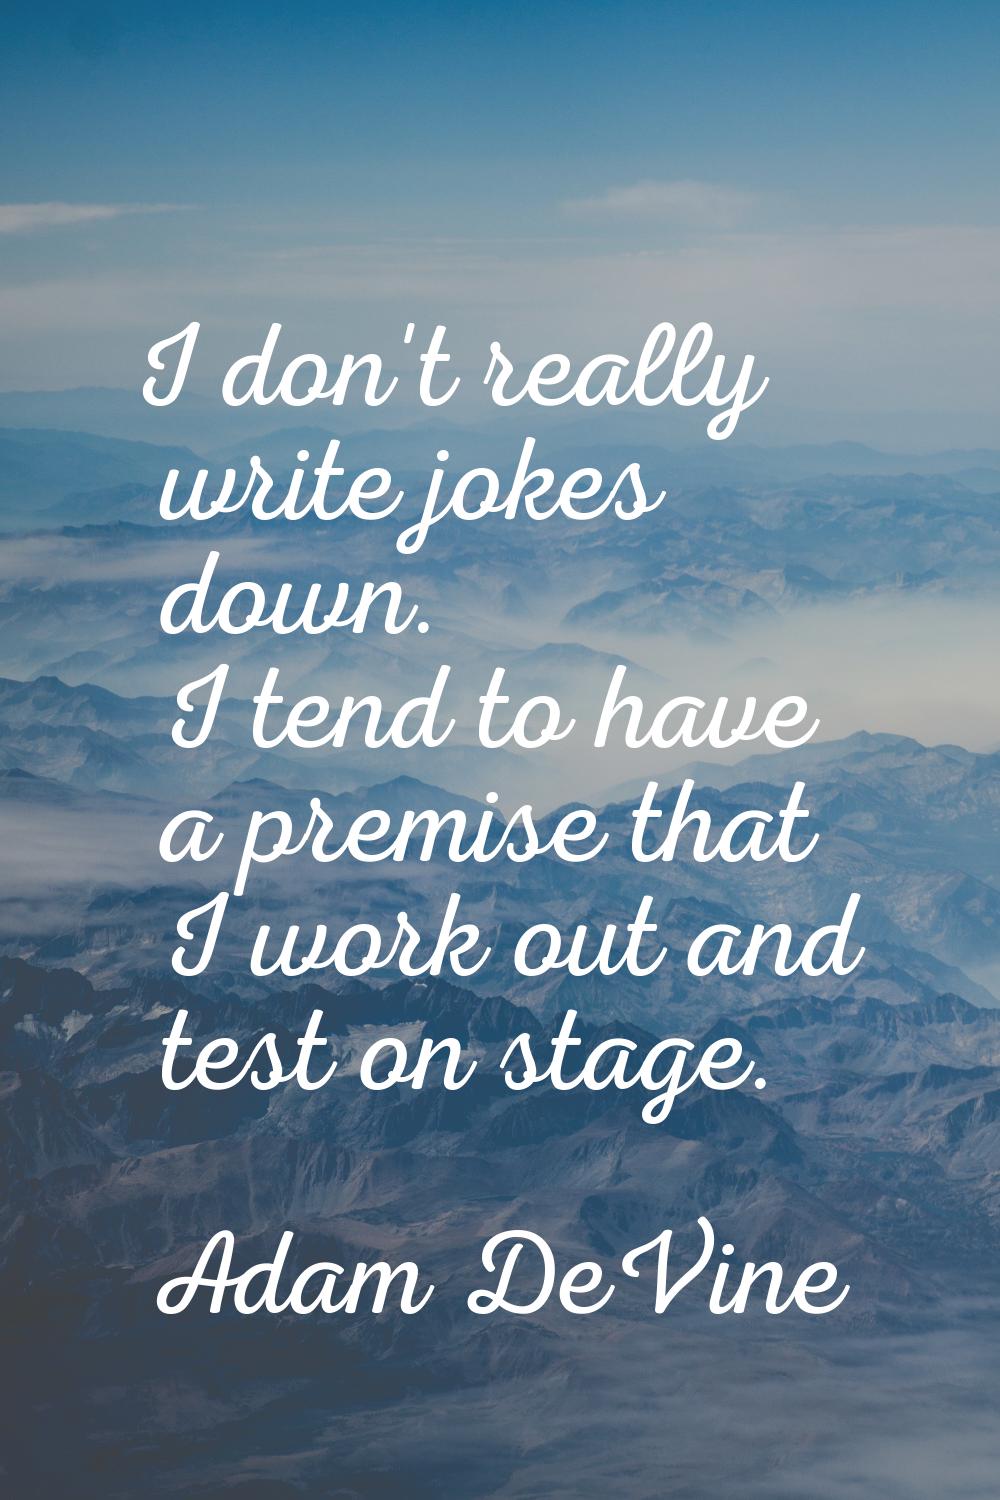 I don't really write jokes down. I tend to have a premise that I work out and test on stage.